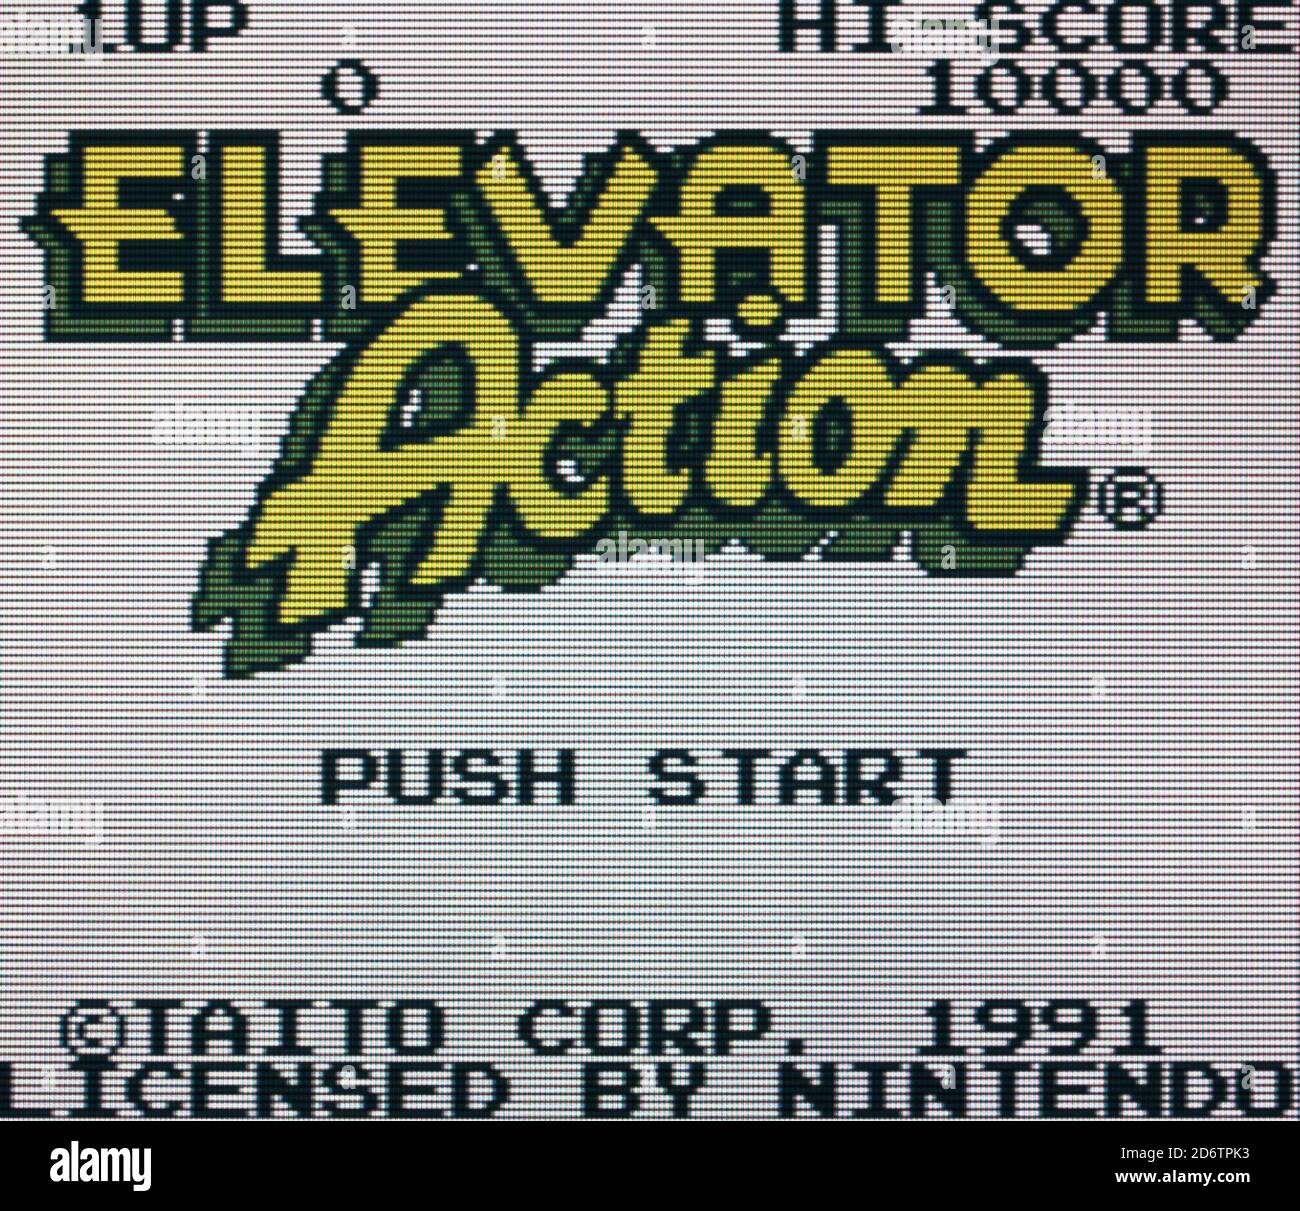 Elevator Action - Nintendo Gameboy Videogame - Editorial use only Stock Photo